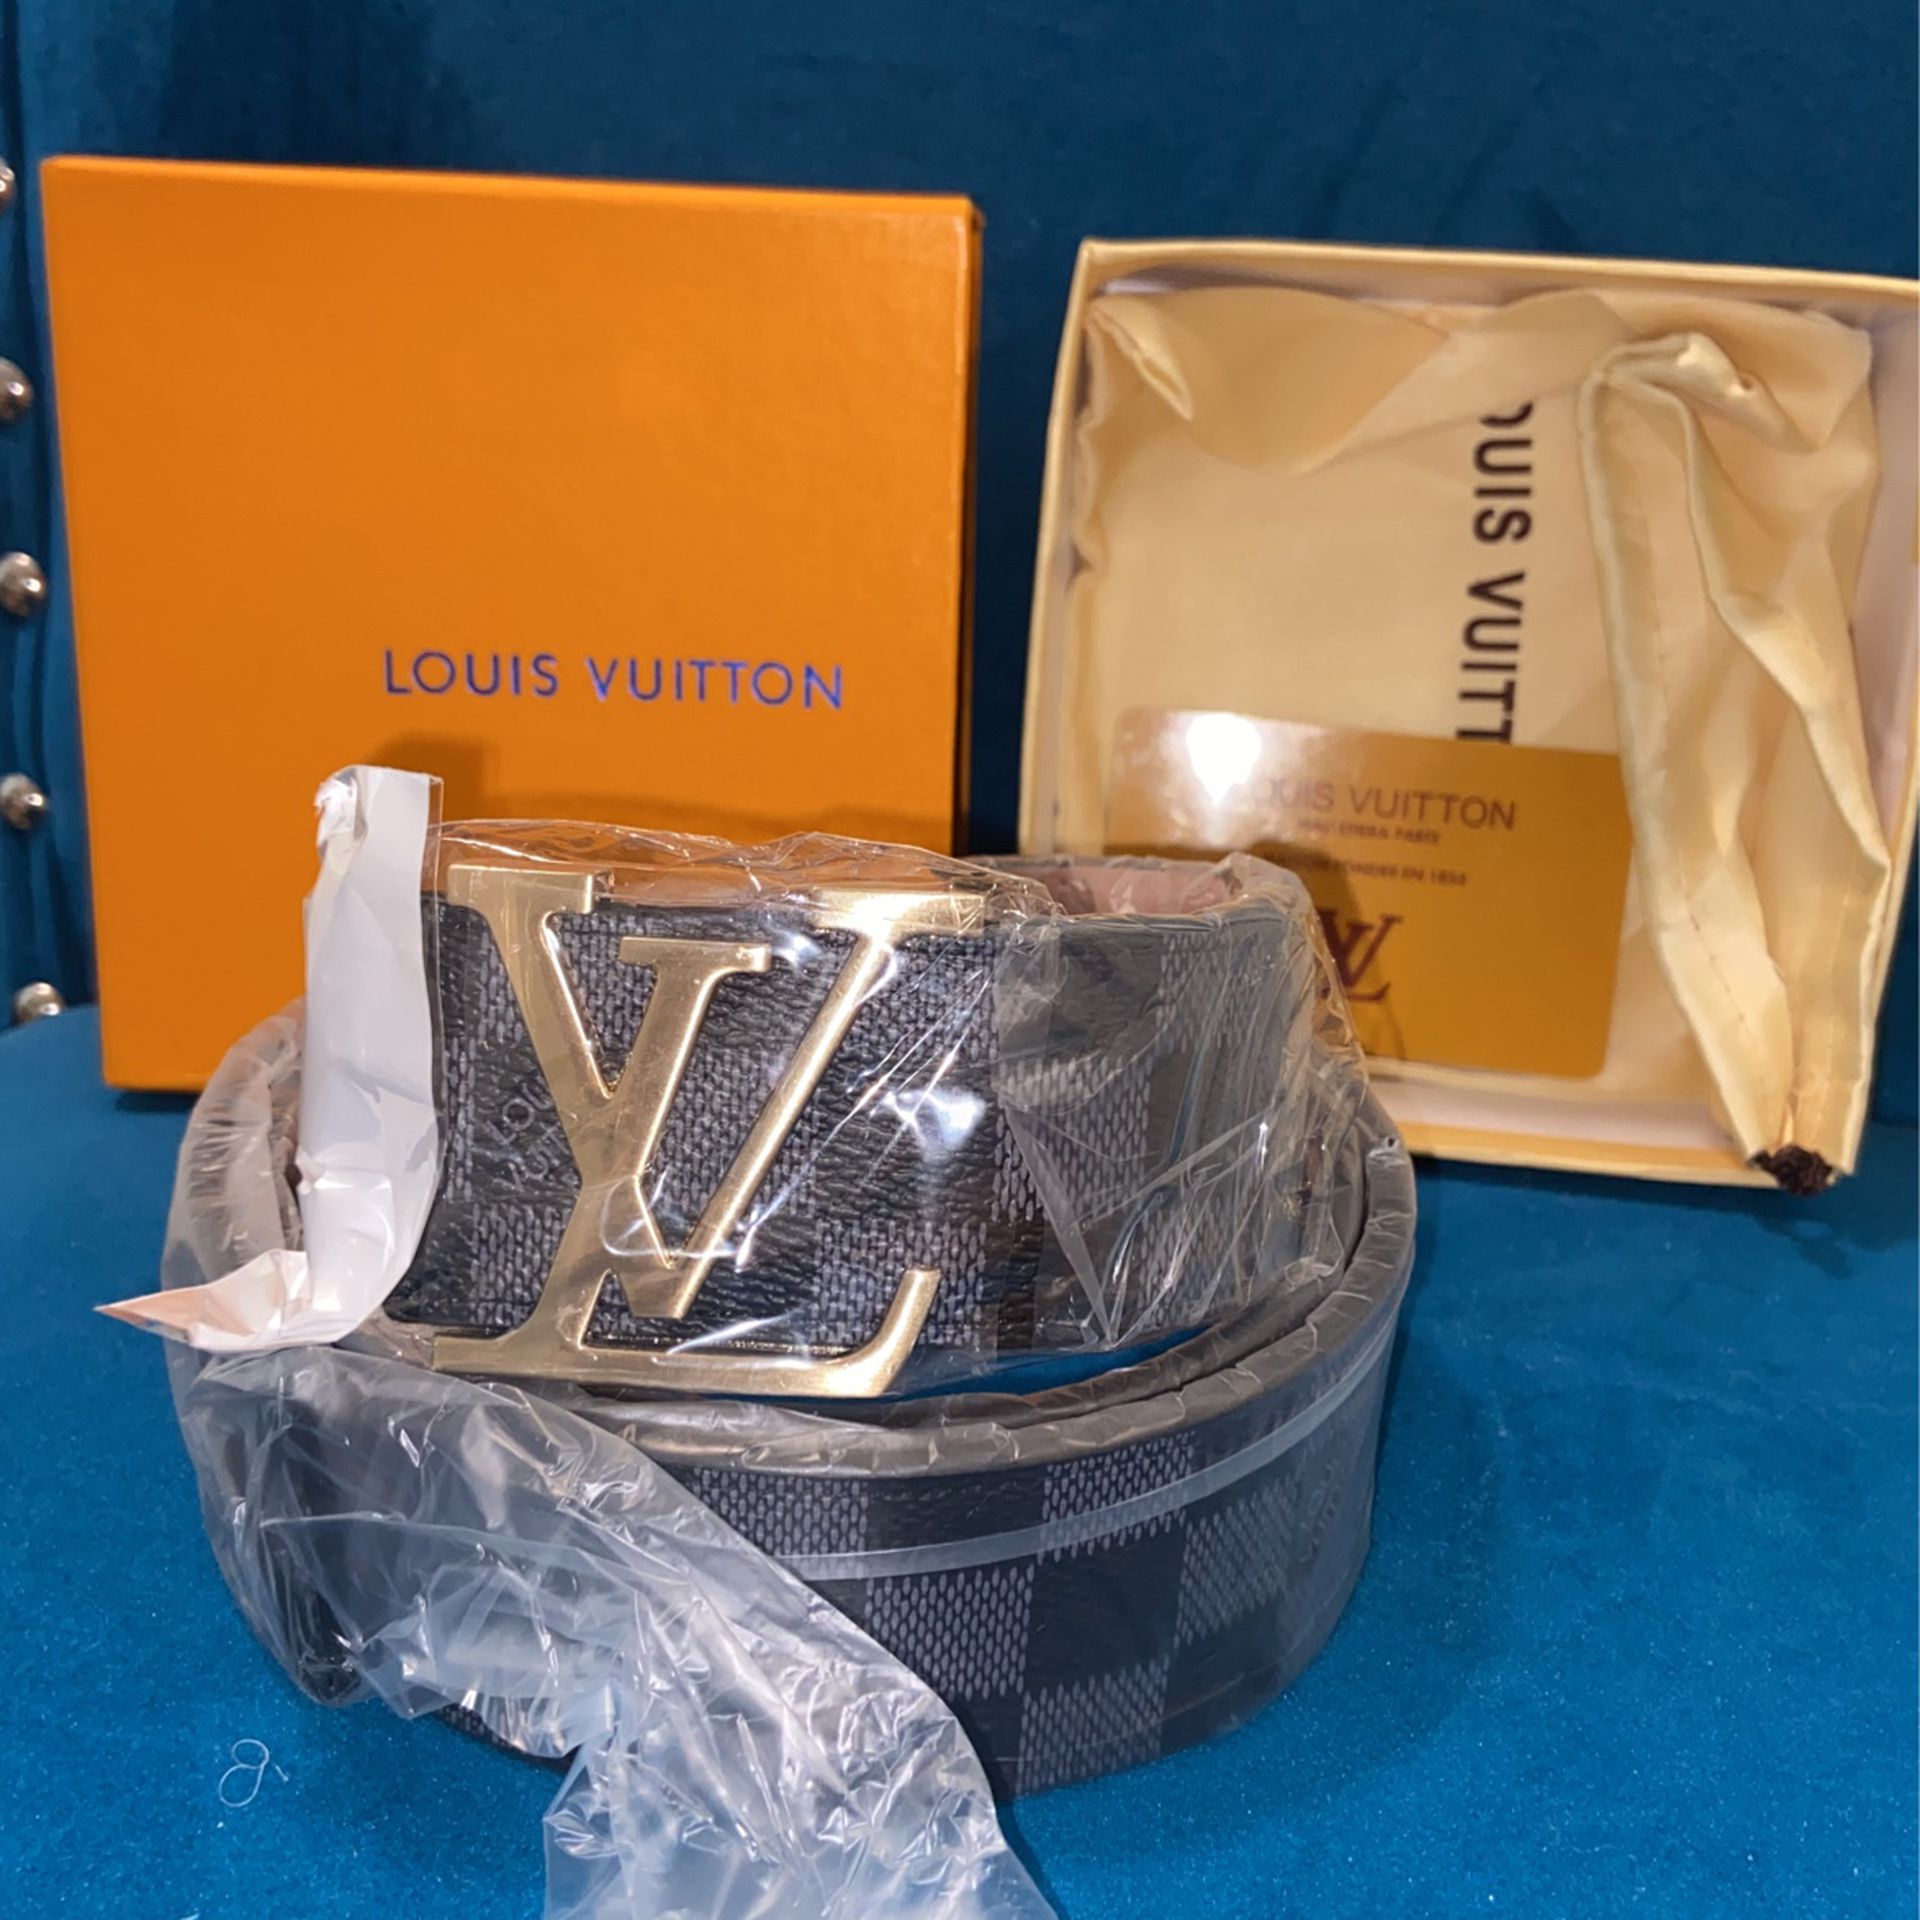 Louis Vuitton shoes and belt for Sale in Mckinney, TX - OfferUp